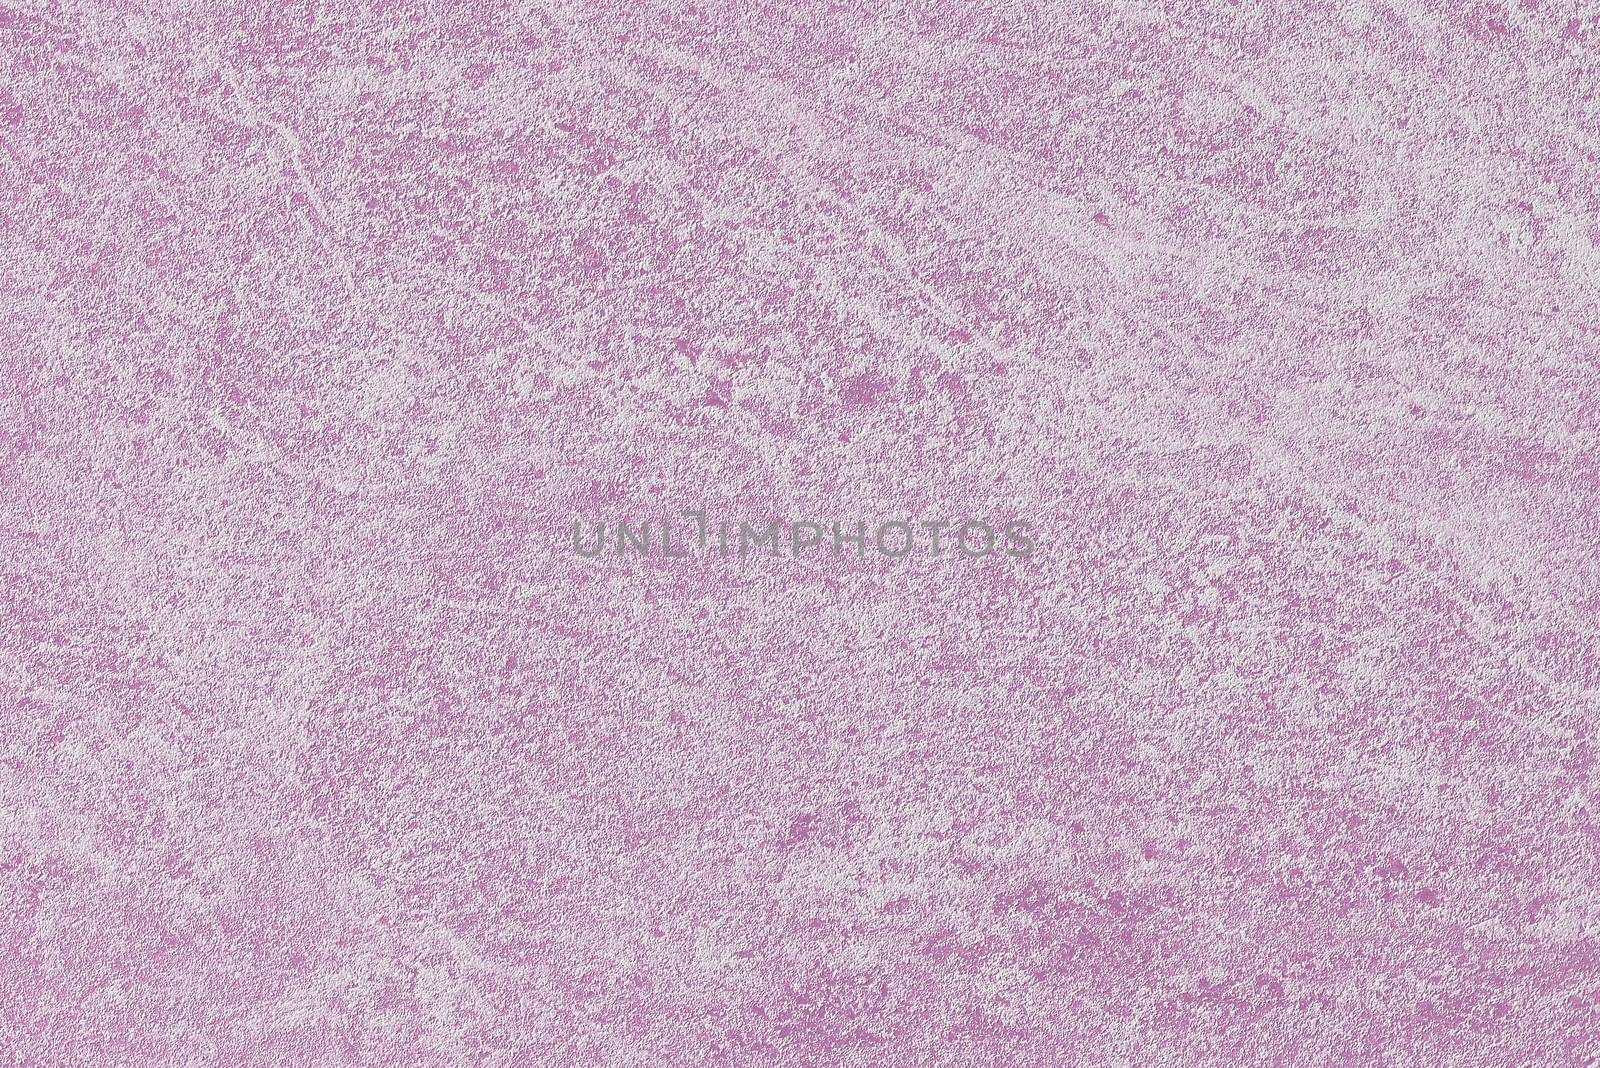 White and pink textures. Abstract pink background.